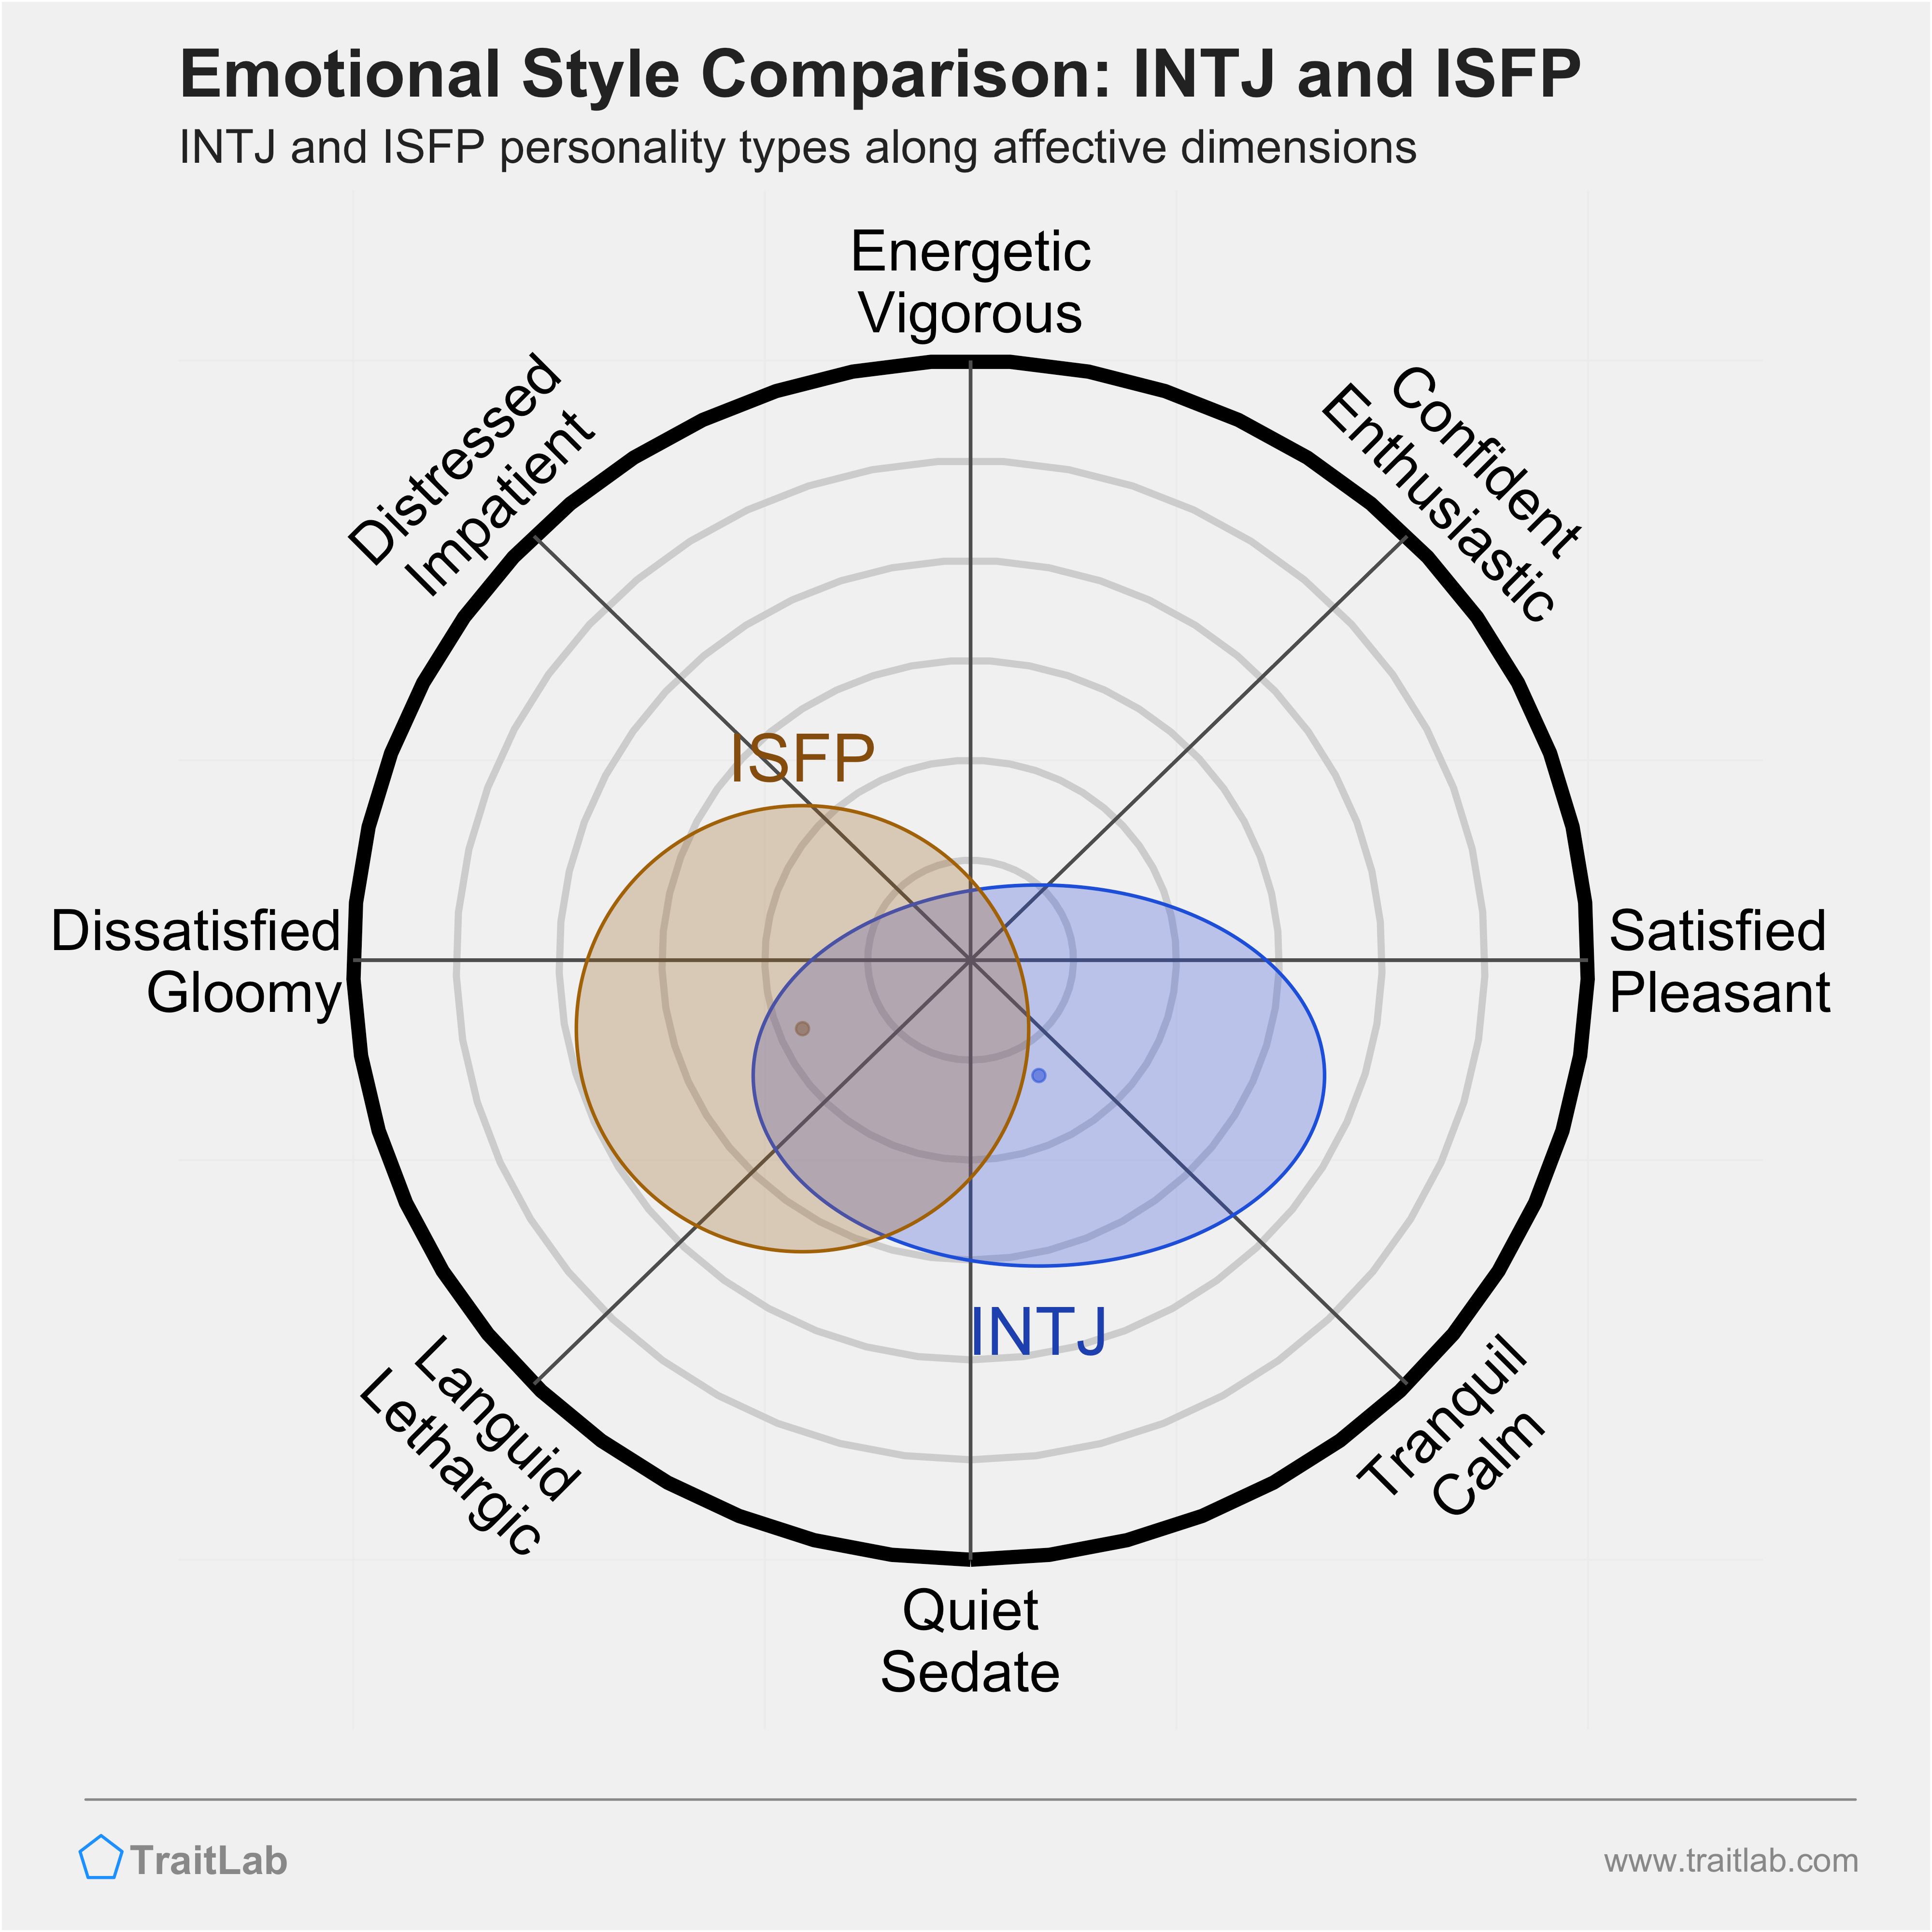 INTJ and ISFP comparison across emotional (affective) dimensions